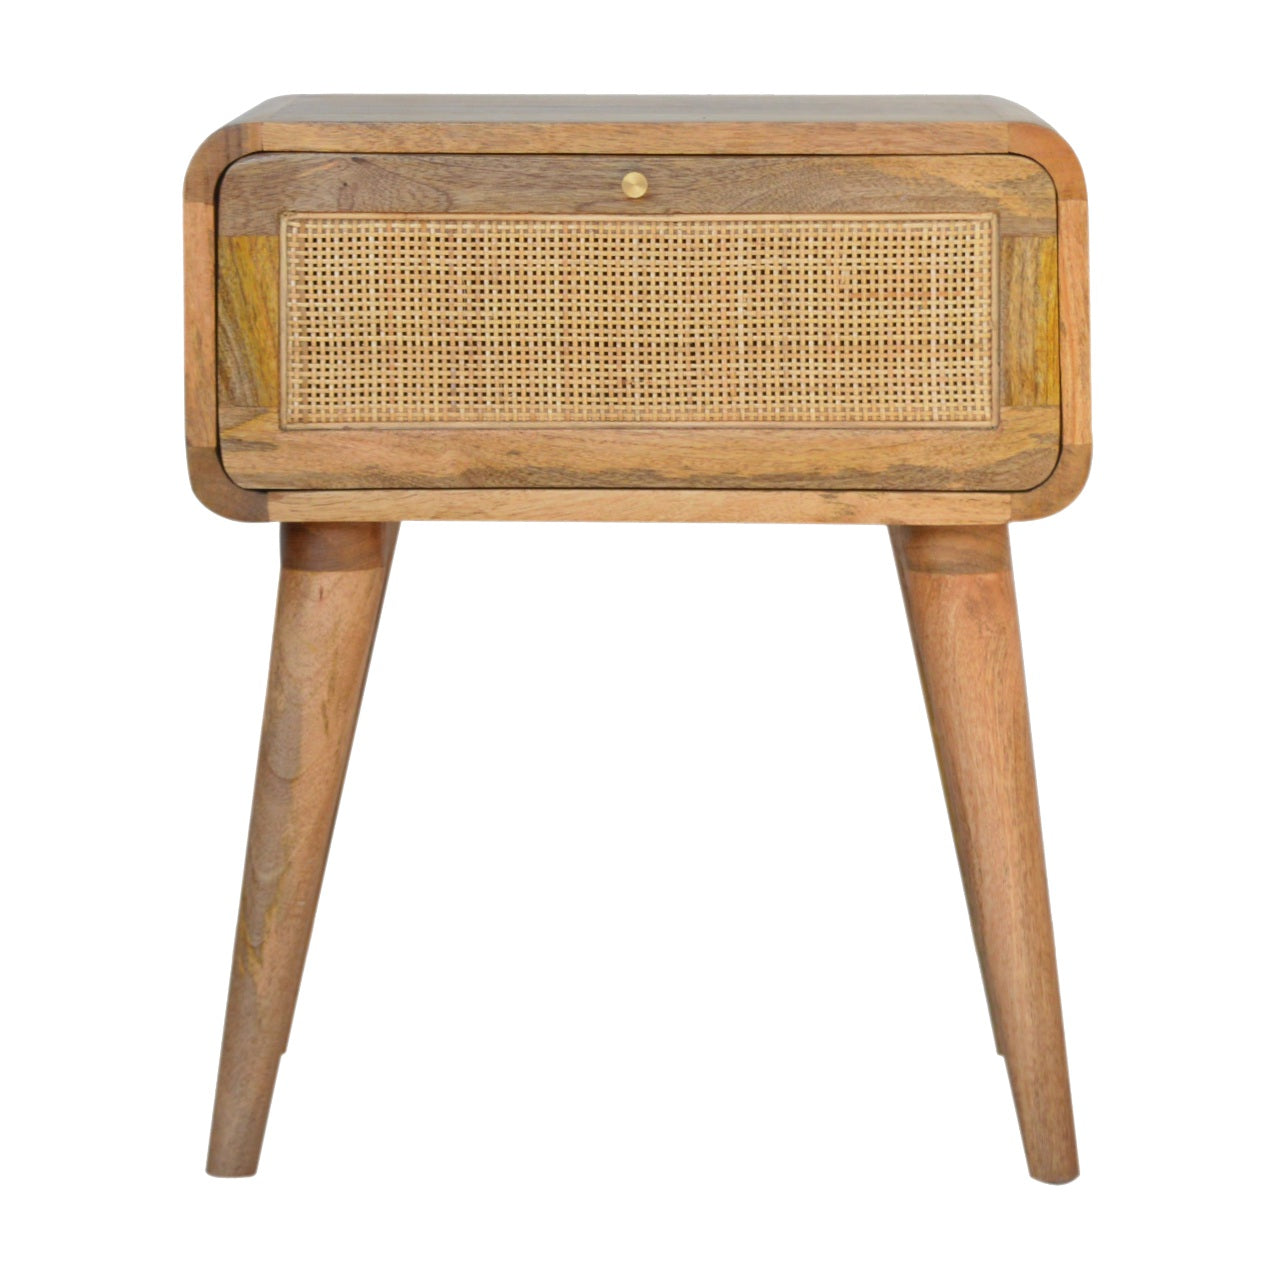 Harlow Bedside Table, Natural Woven Rattan